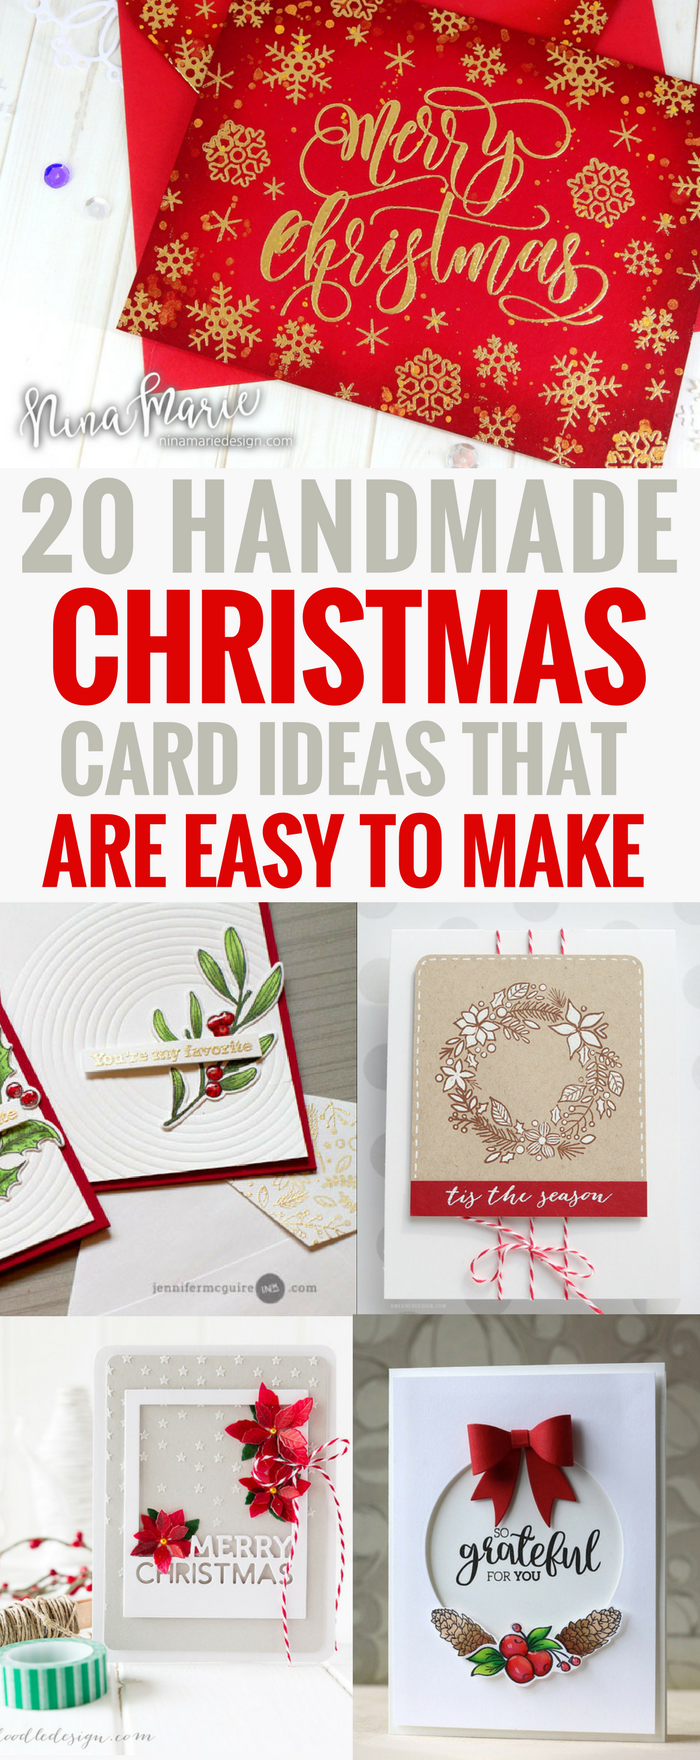 20 Gorgeous Handmade Christmas Cards Ideas That Are Easy To Make